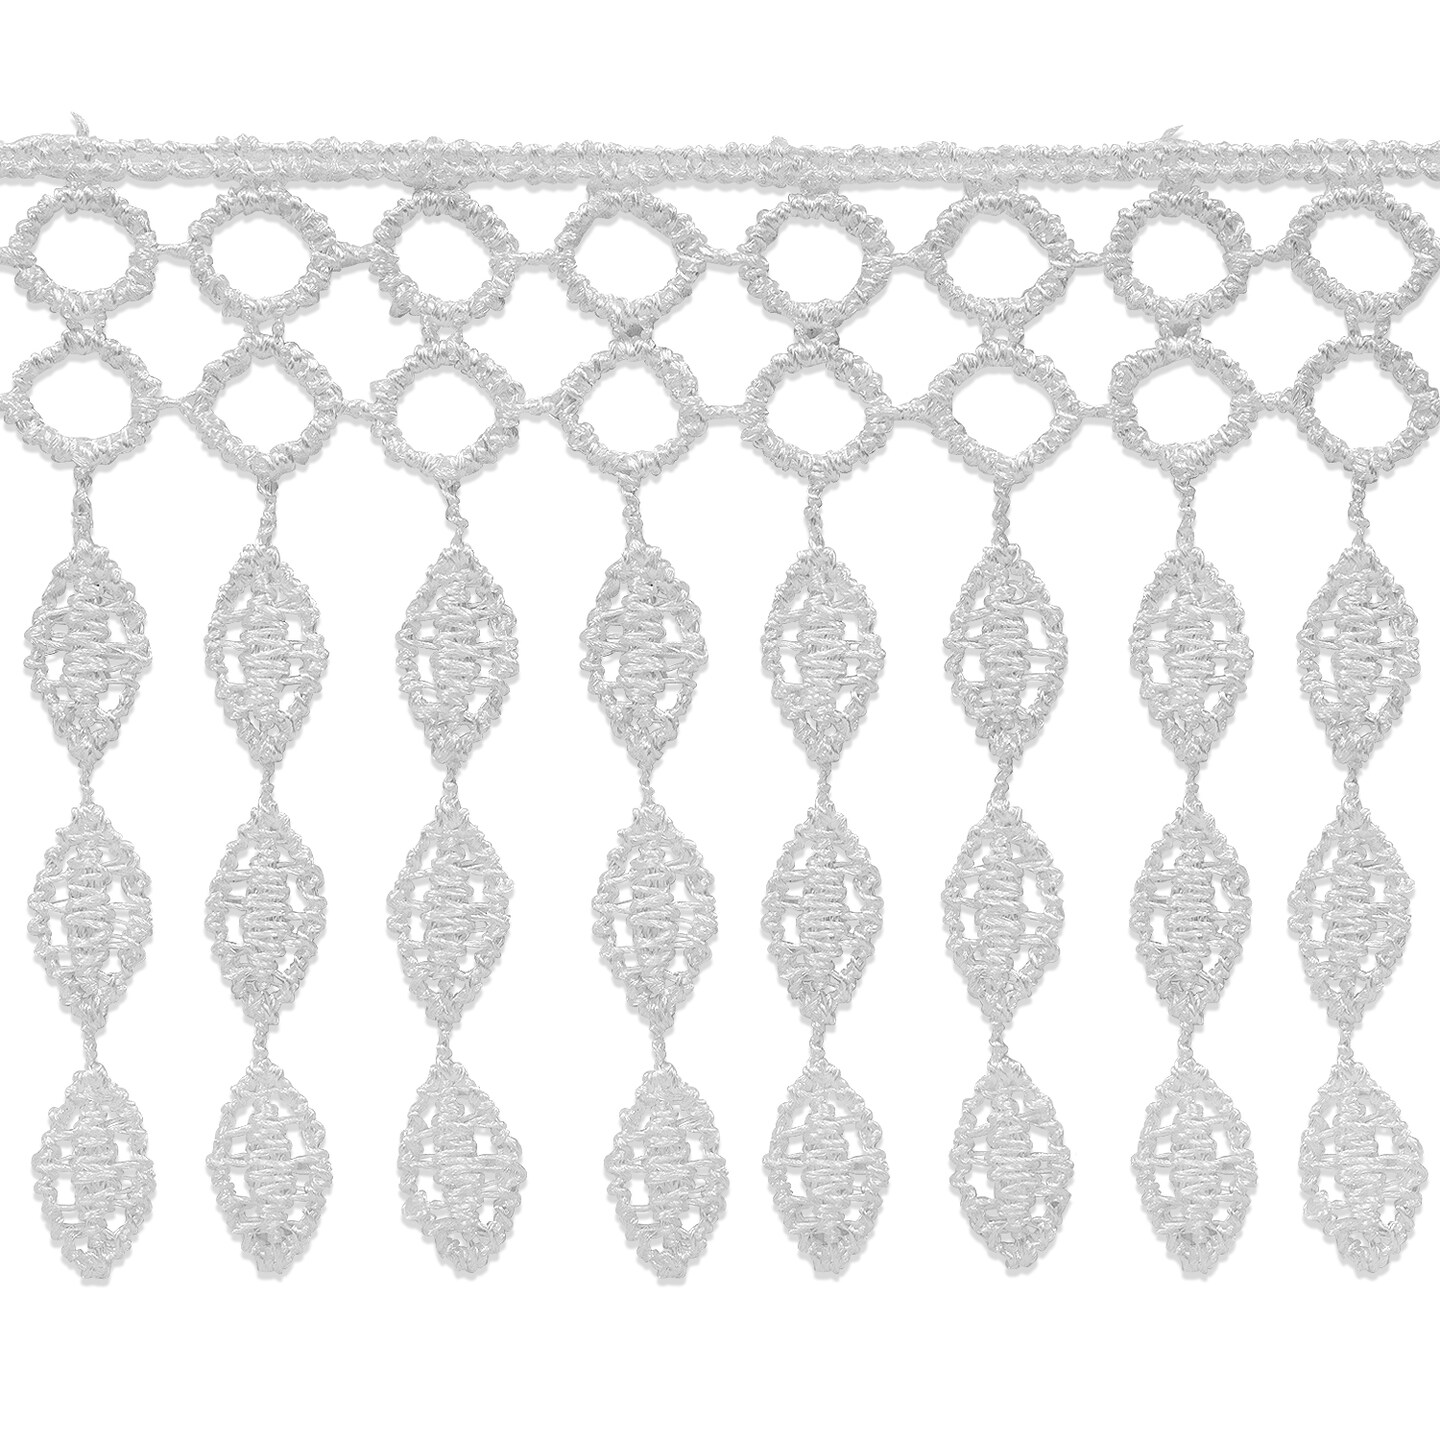 5 yards of Constance Victorian Lace Fringe Trim